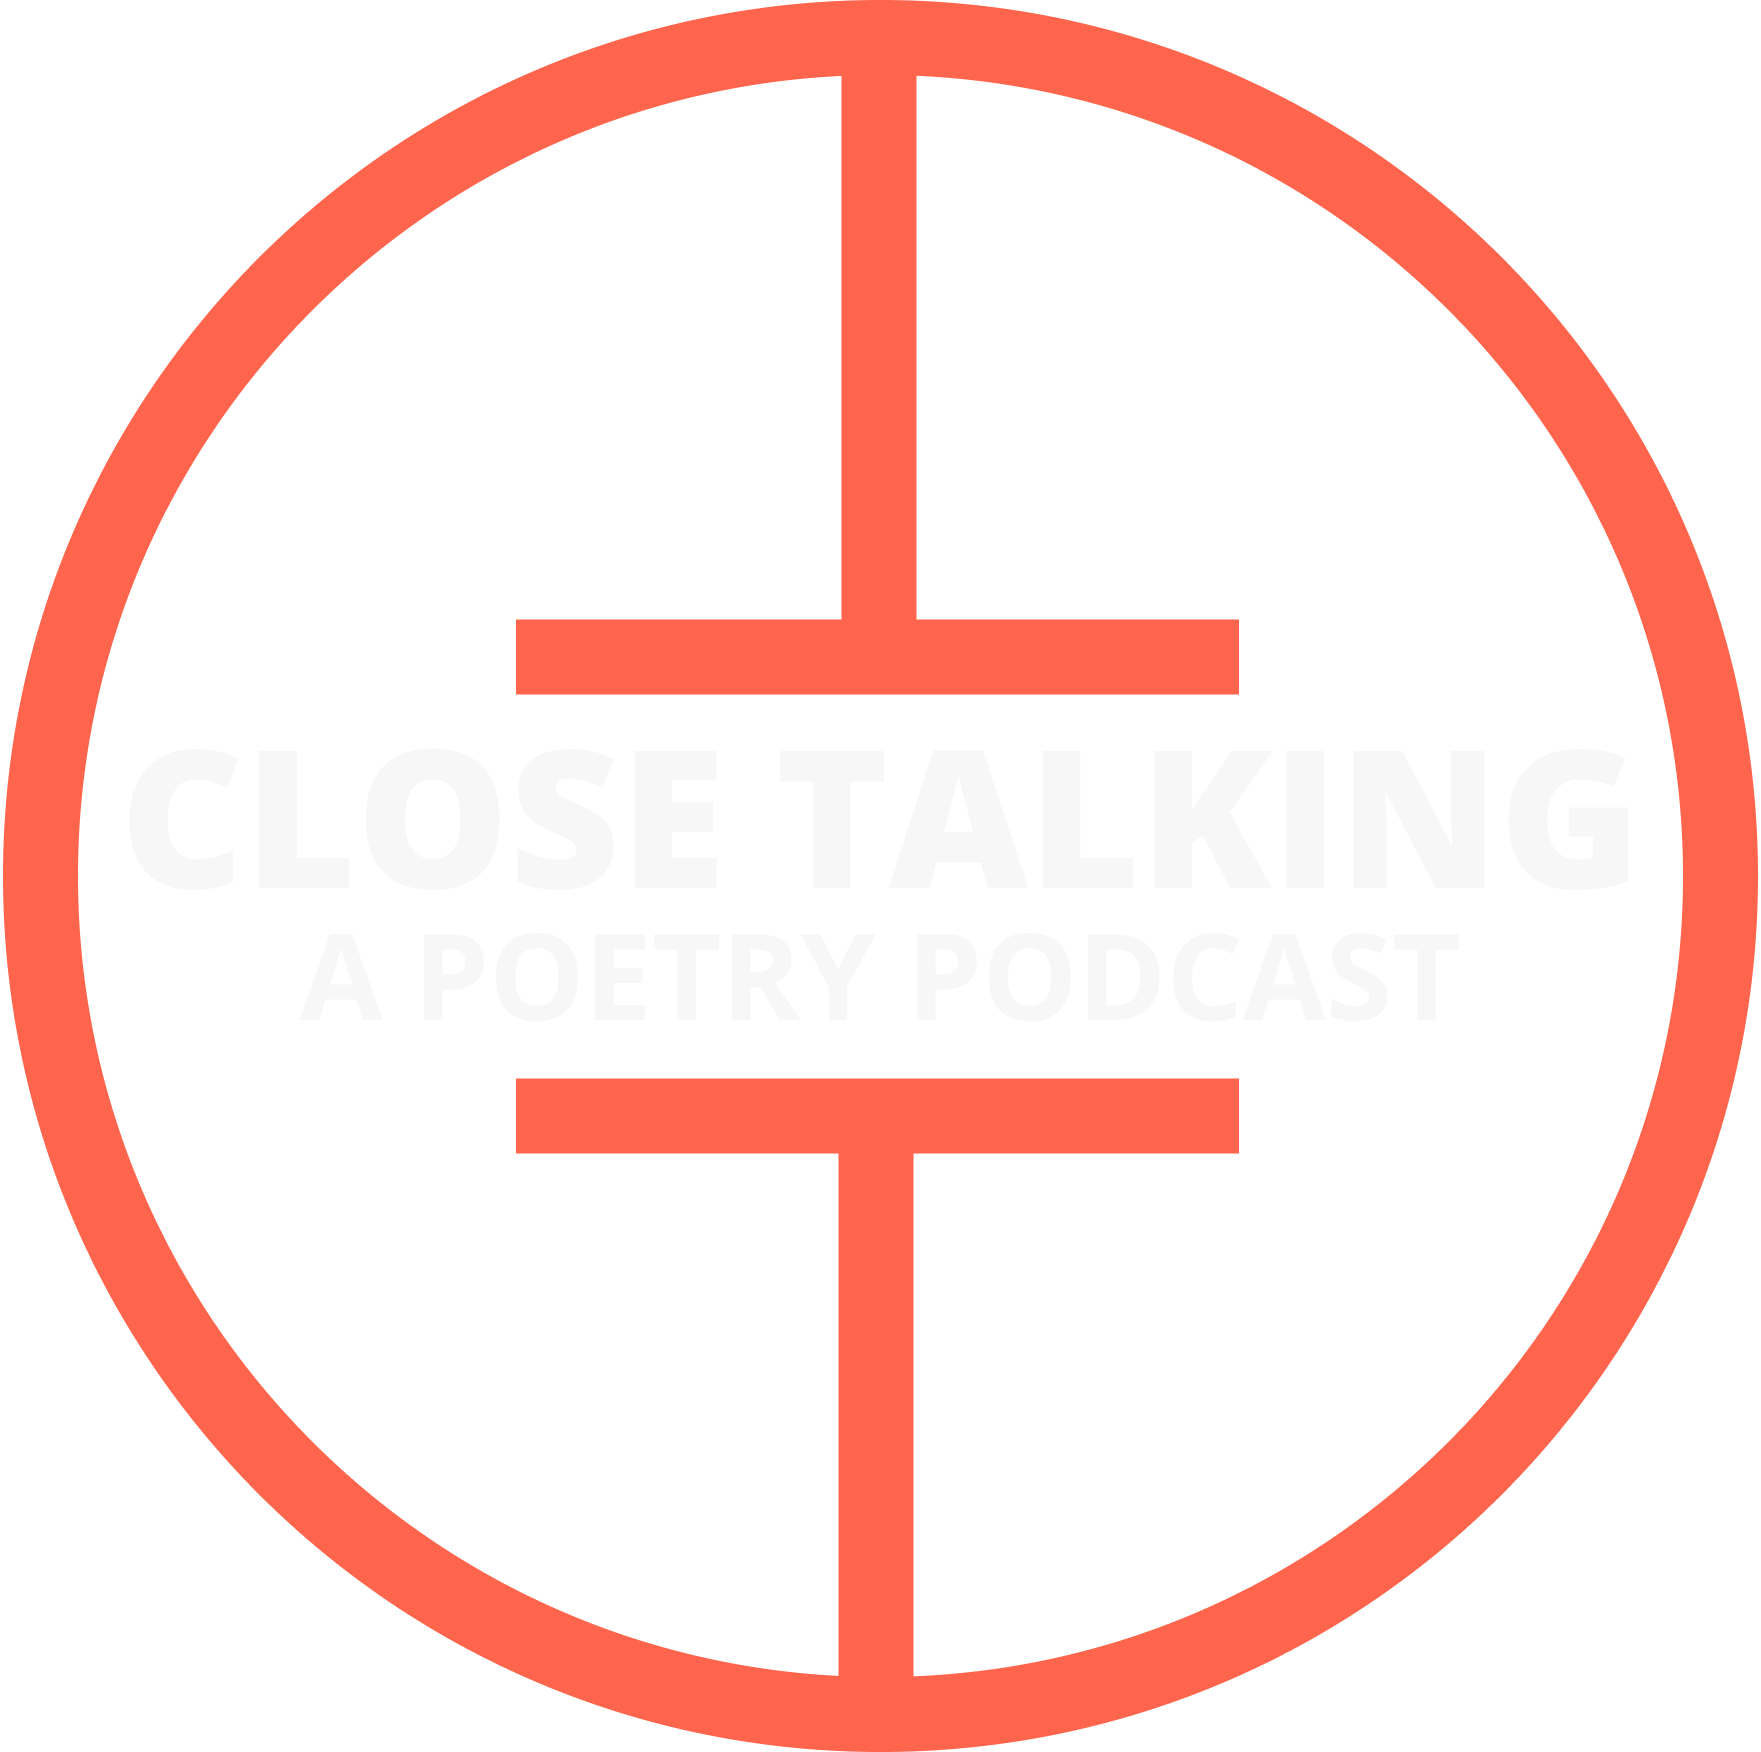 Close Talking: A Poetry Podcast